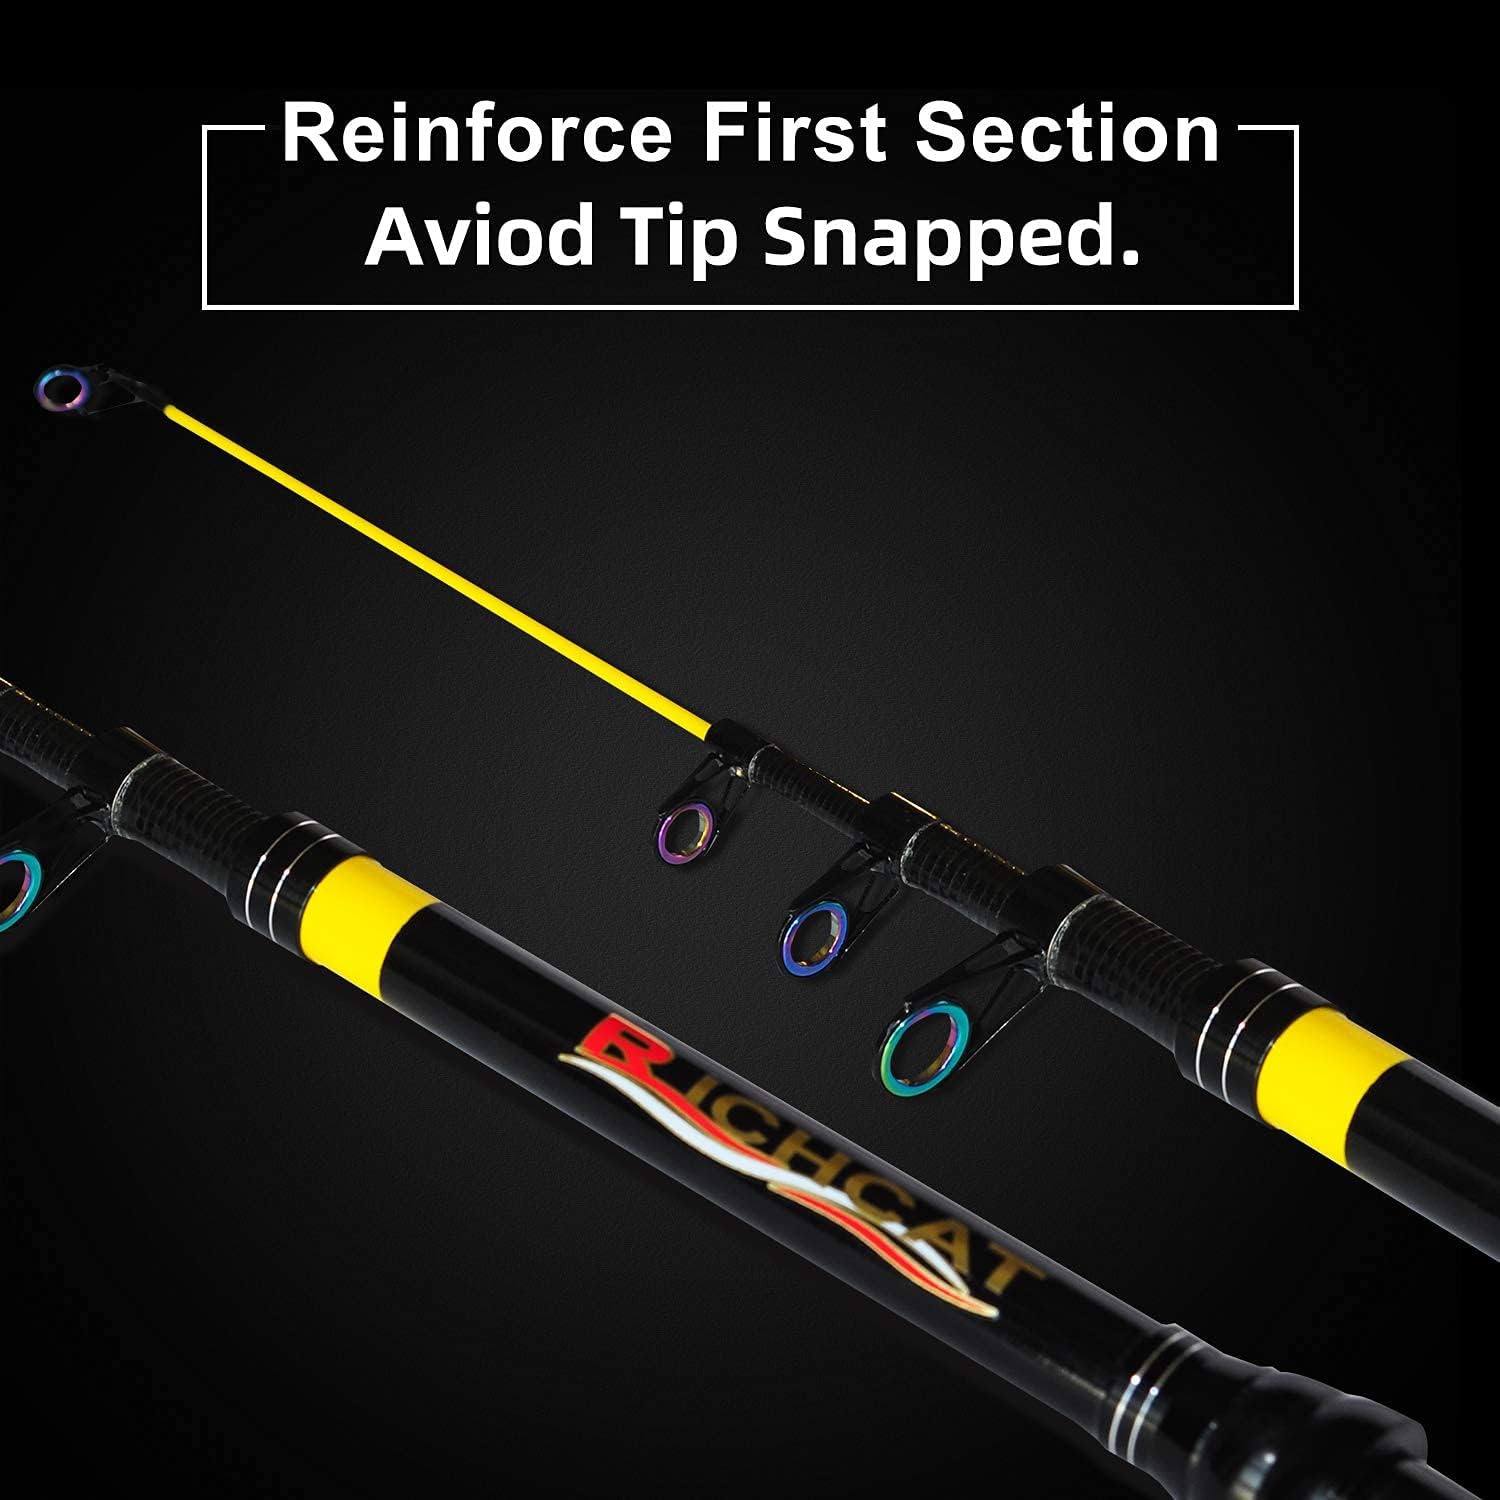 Fishing Rod and Reel Combo，Medium Heavy Poles and Reels Telescopic Rod Kits for Adults， 22Lb Line Pre-Spooled with Spining Reel for Travel Saltwater Freshwater Catfish Bass Fishing